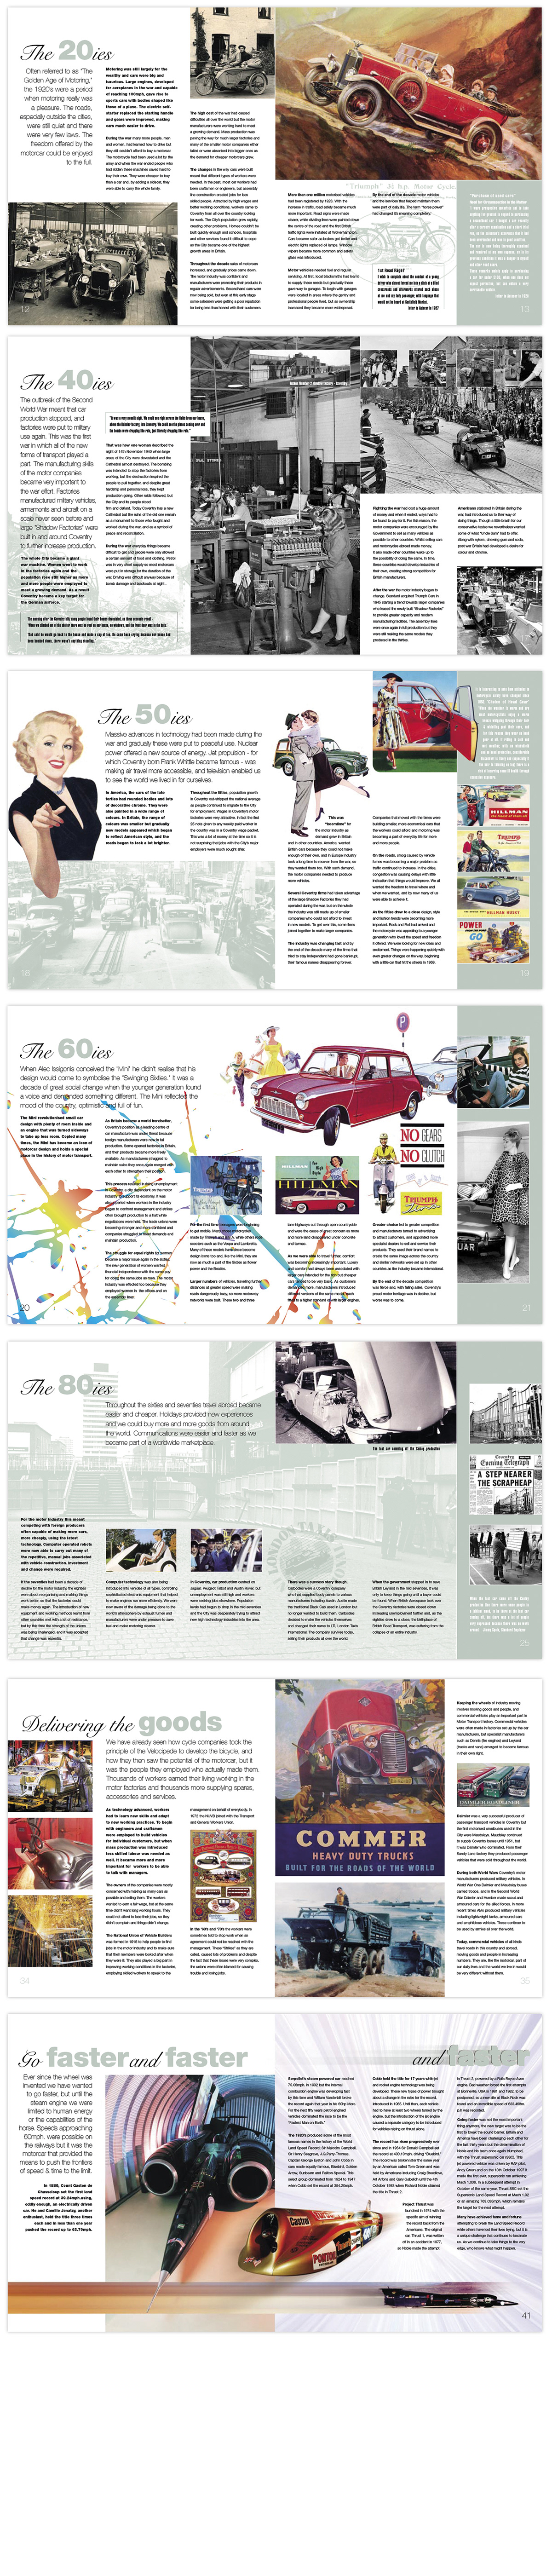 Coventry Transport Museum design artwork book design marketing materials Concepting Analysis Archive research